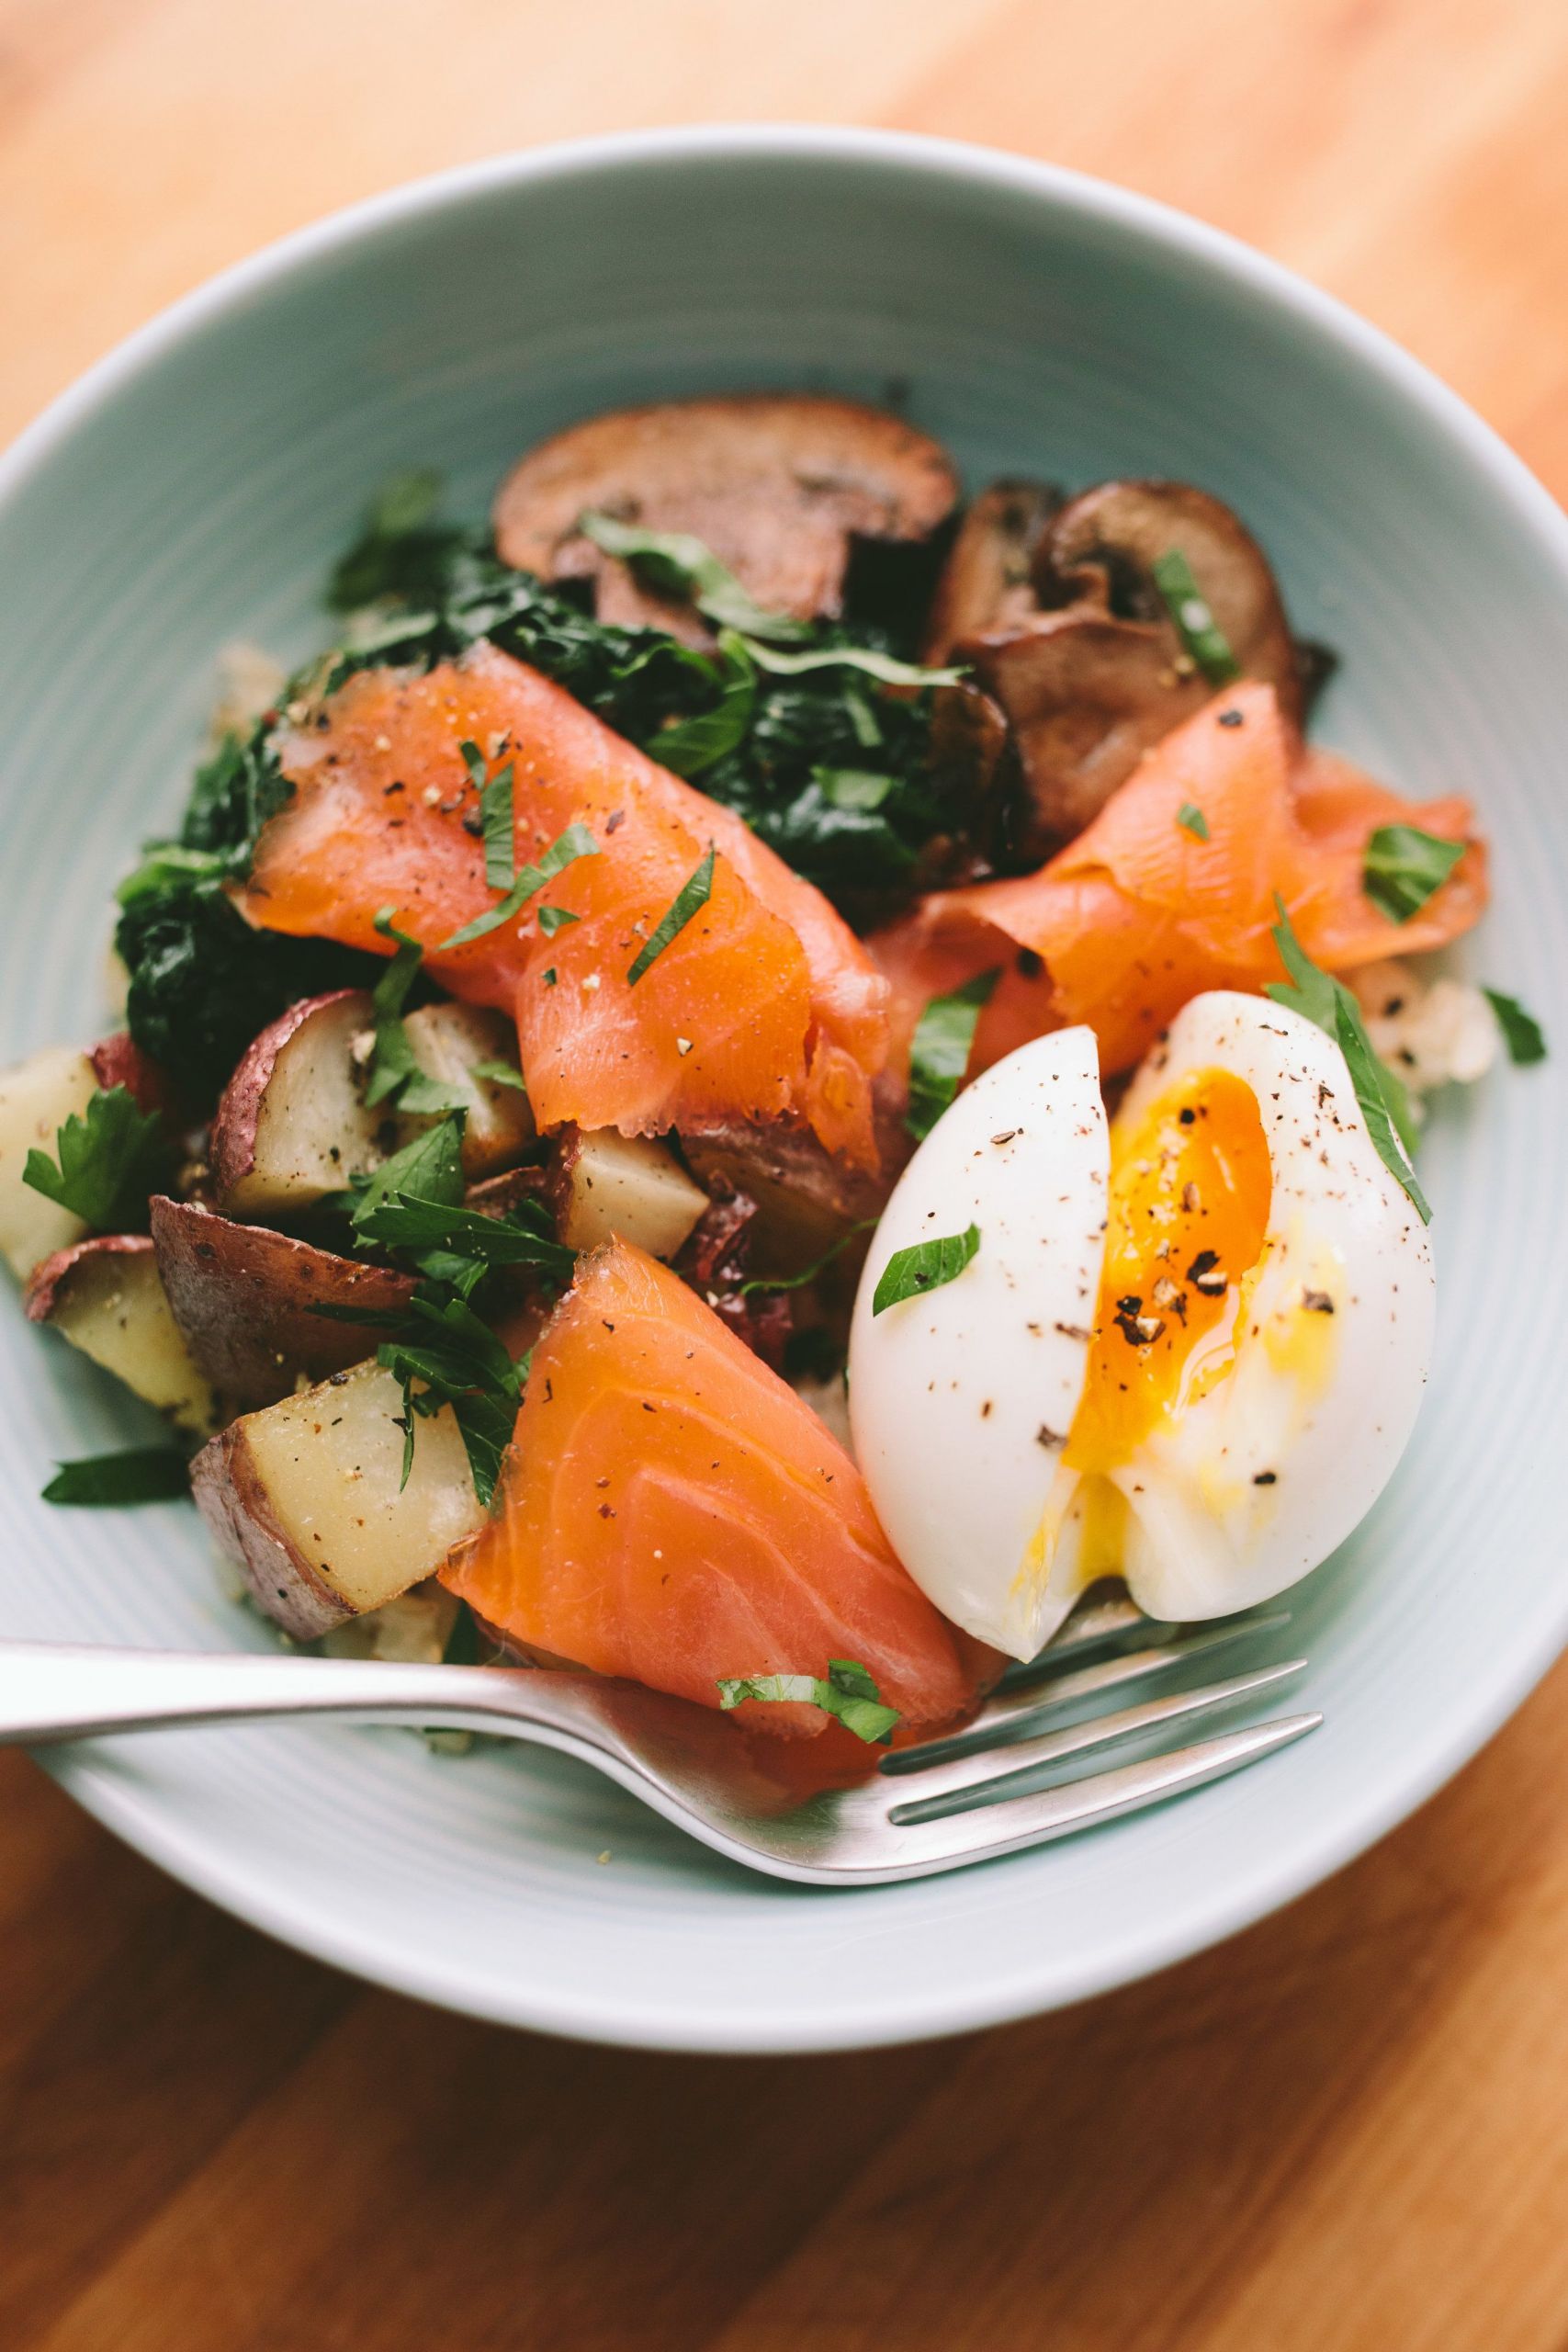 Smoked Salmon Breakfast Recipes
 Smoked Salmon Breakfast Bowl with a 6 Minute Egg